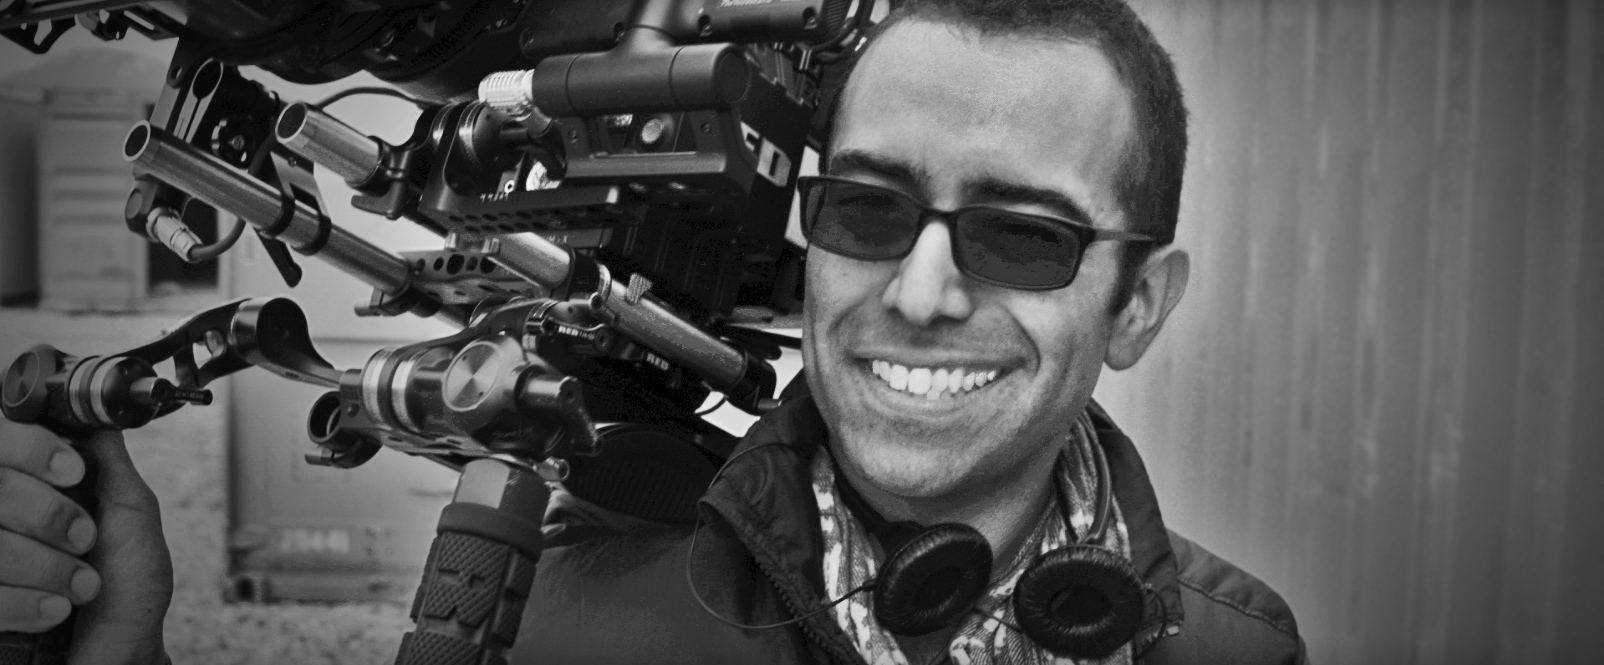 Director/Producer Sohrab Mirmont also camera operated some of the action sequences in 